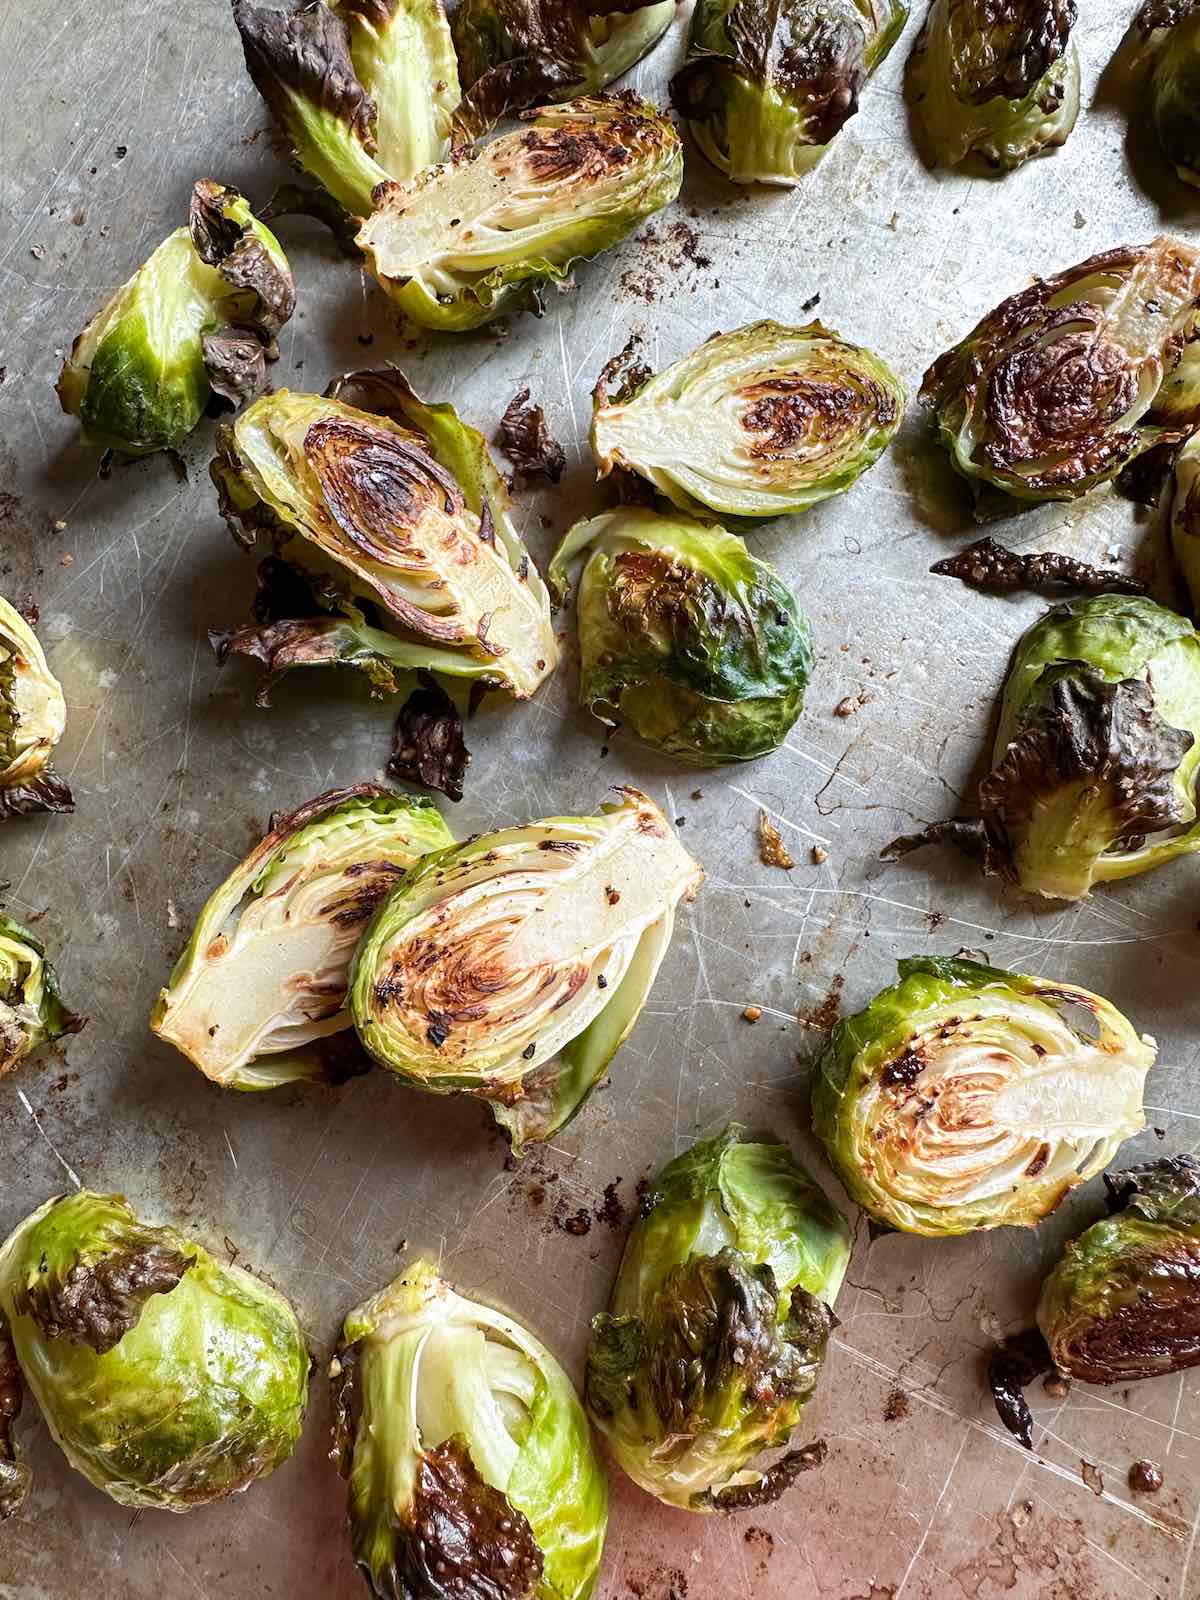 Roasted Brussels sprouts after cooking on a sheet pan.